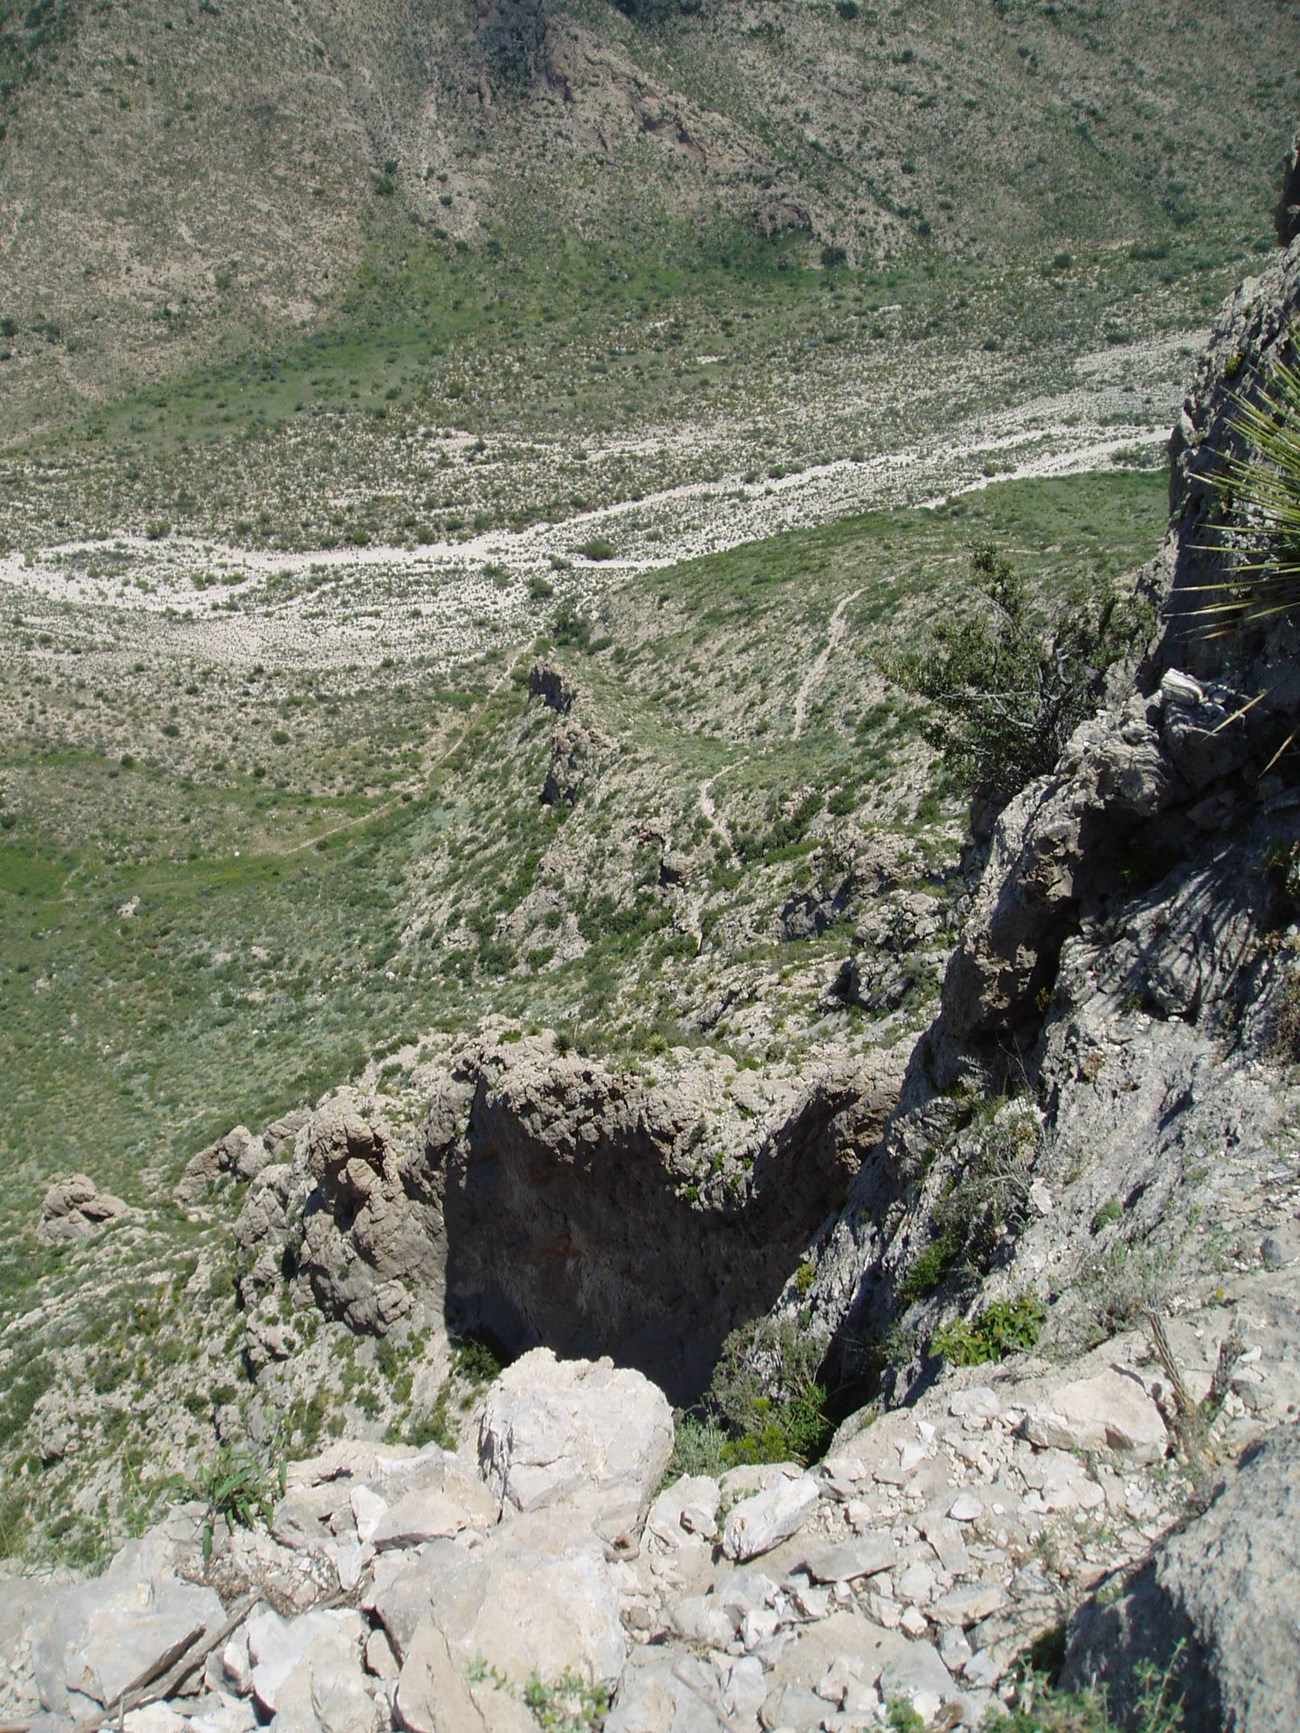 Looking down onto the Slaughter Canyon Cave trail